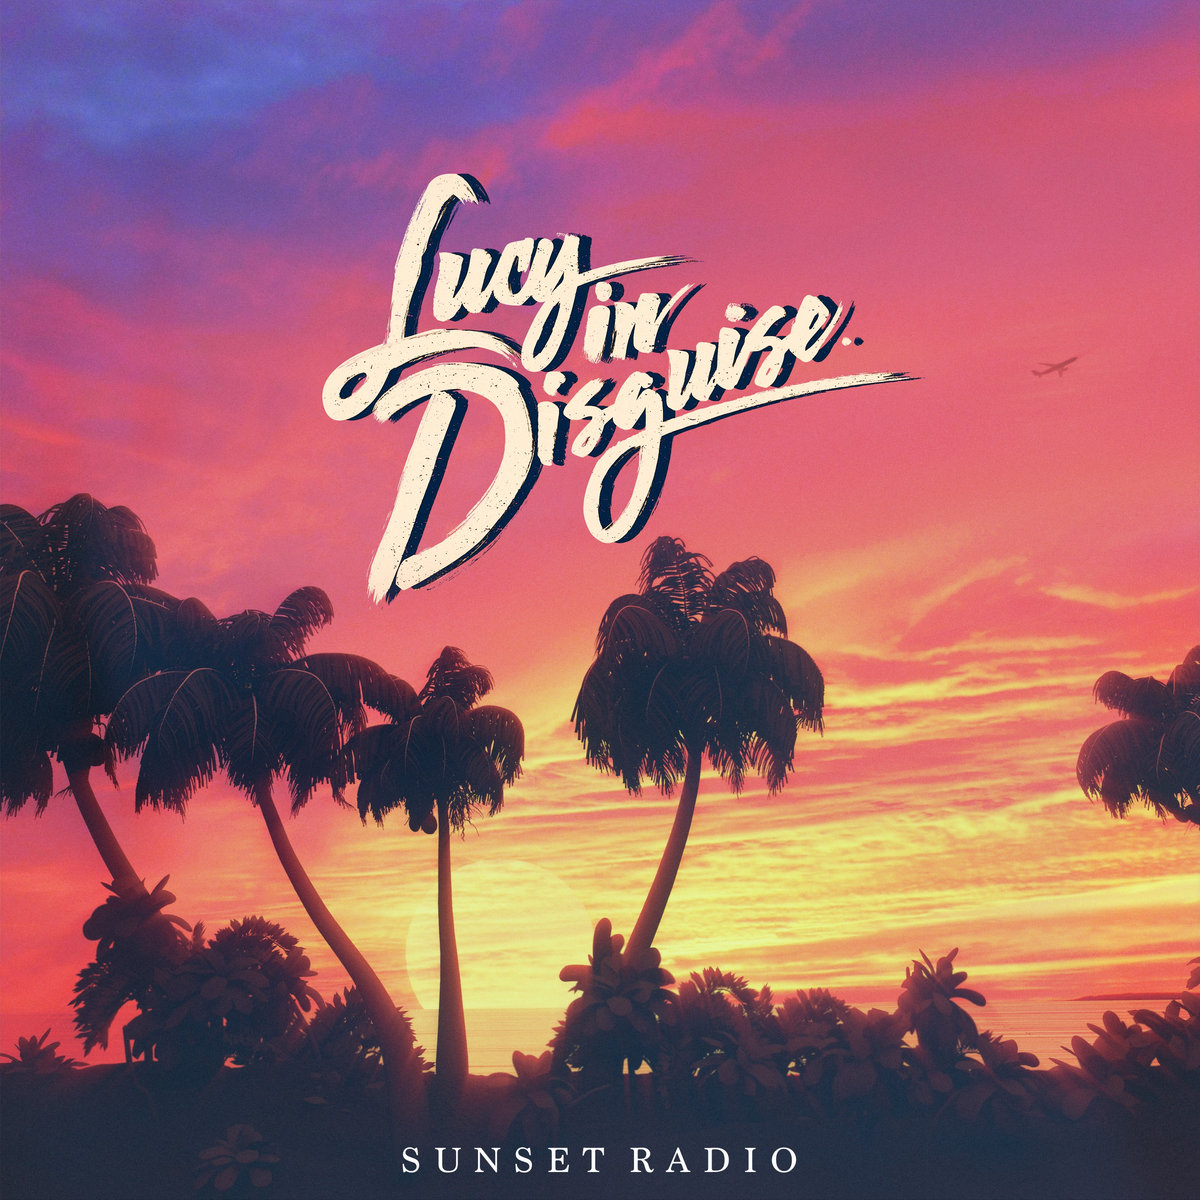 a4016011785 10 1 - Lucy In Disguise - Sunset Radio